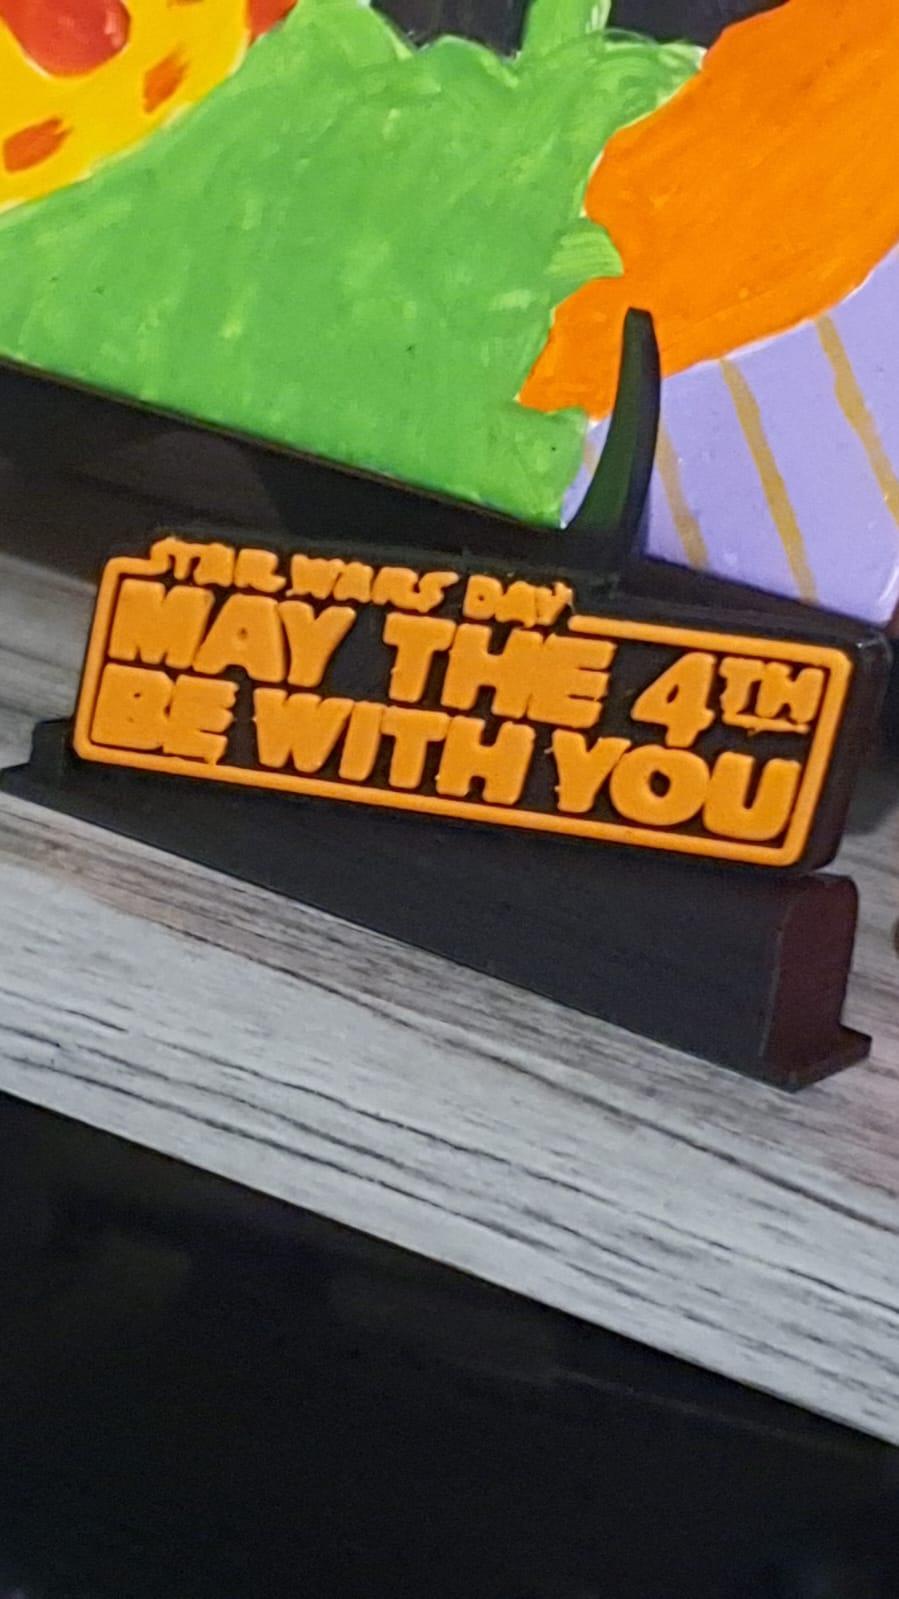 Star Wars Day - May The 4th Be With You 3d model